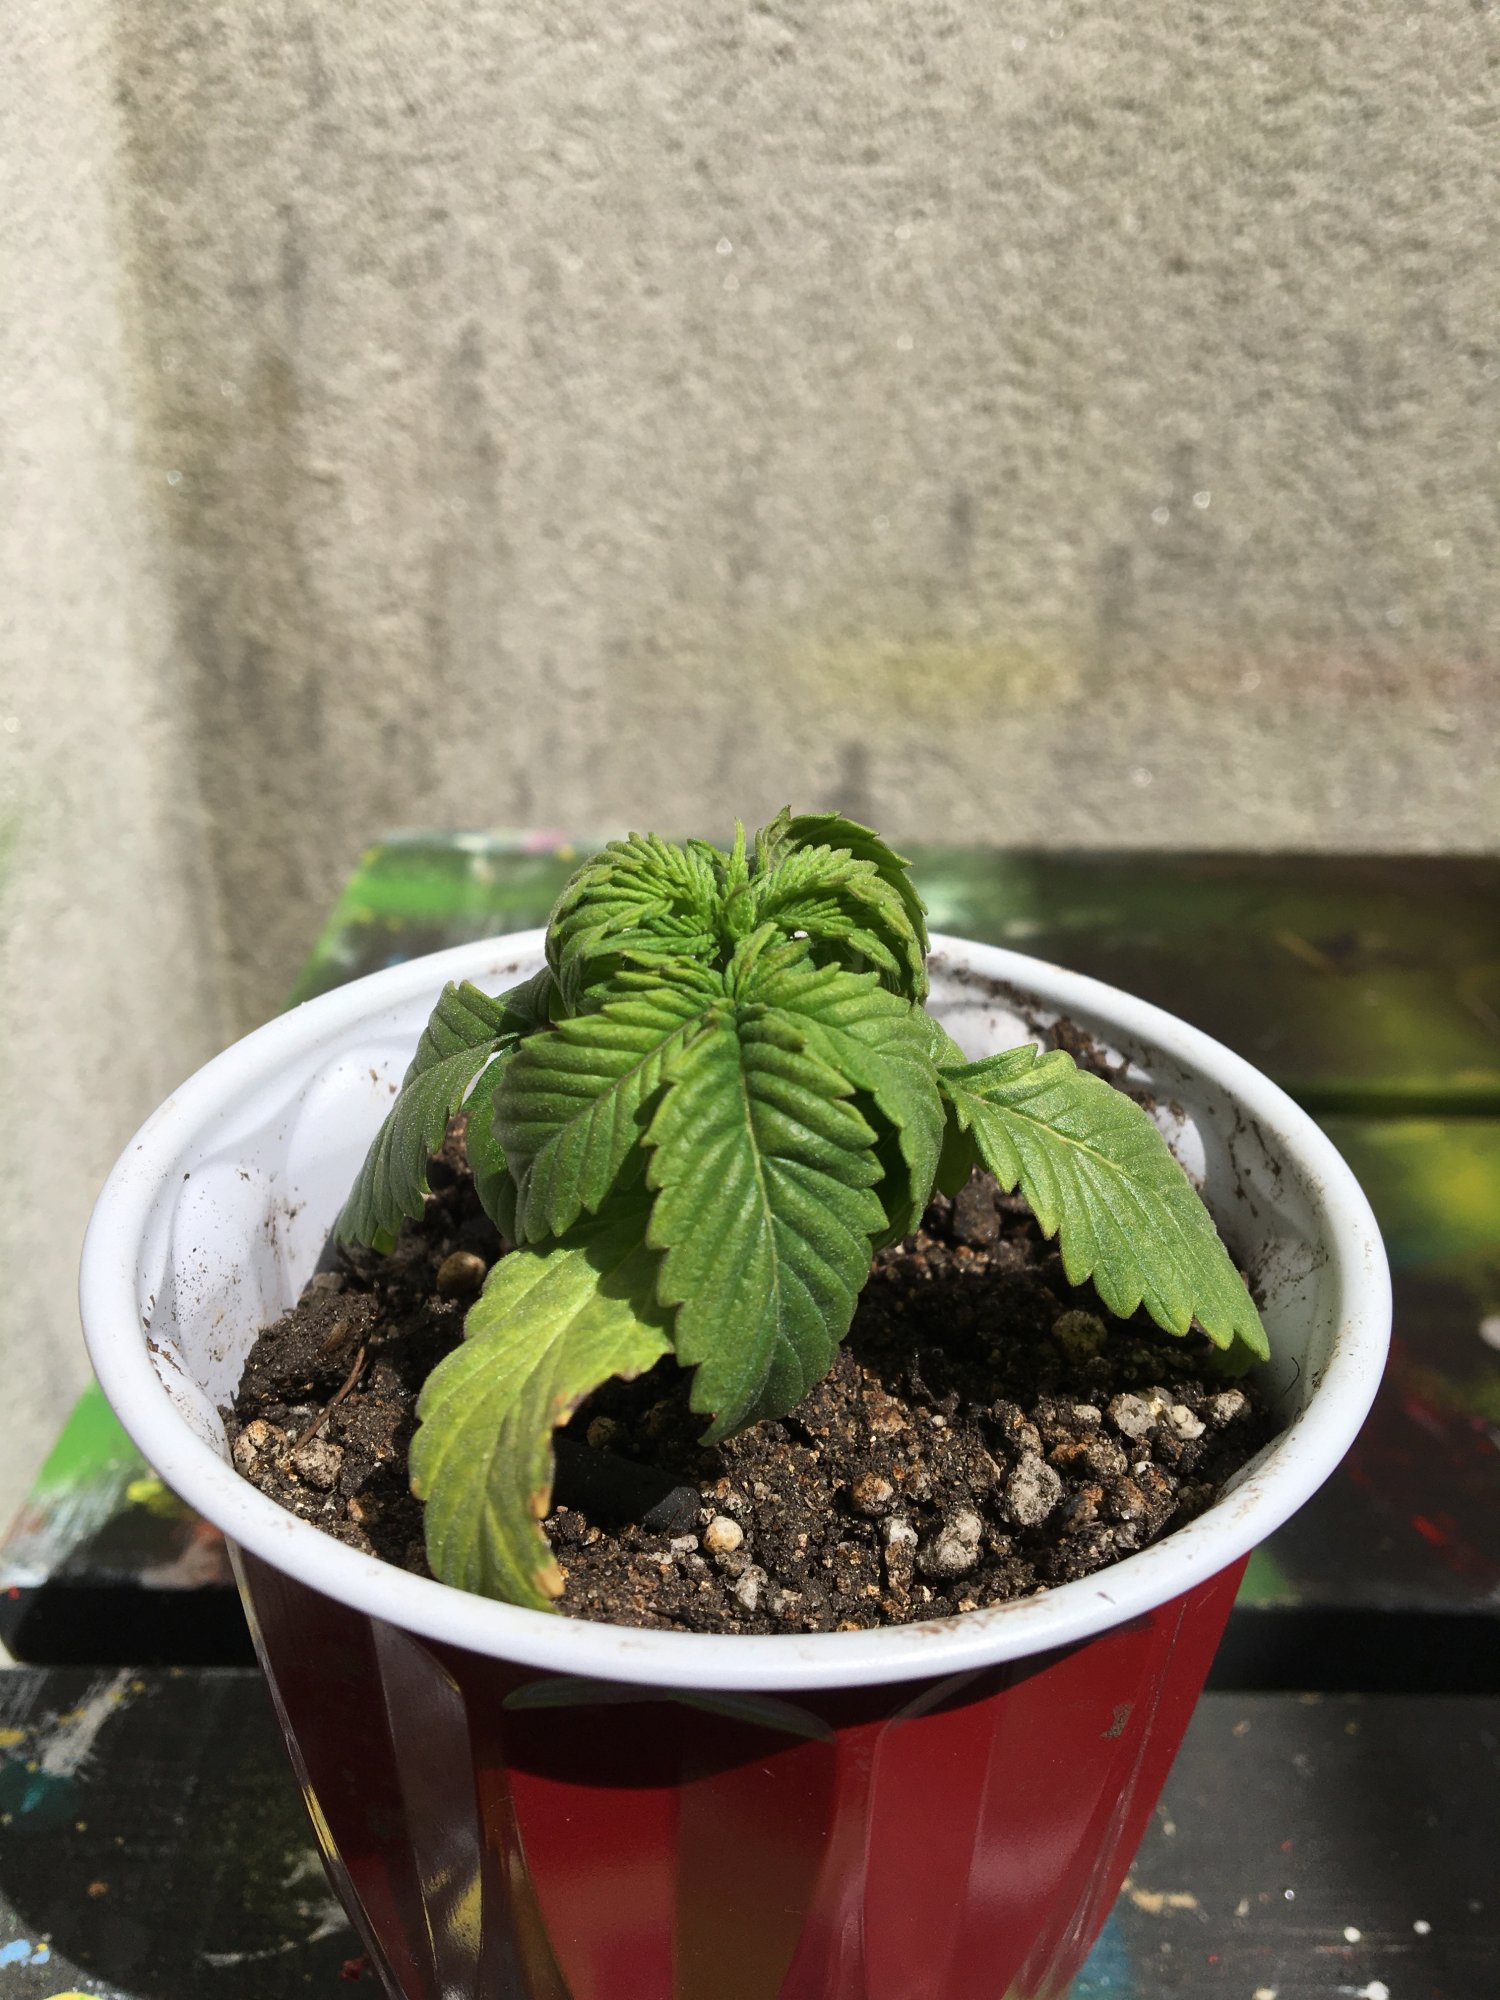 Leaf curling and yellowing issues on seedlings 8